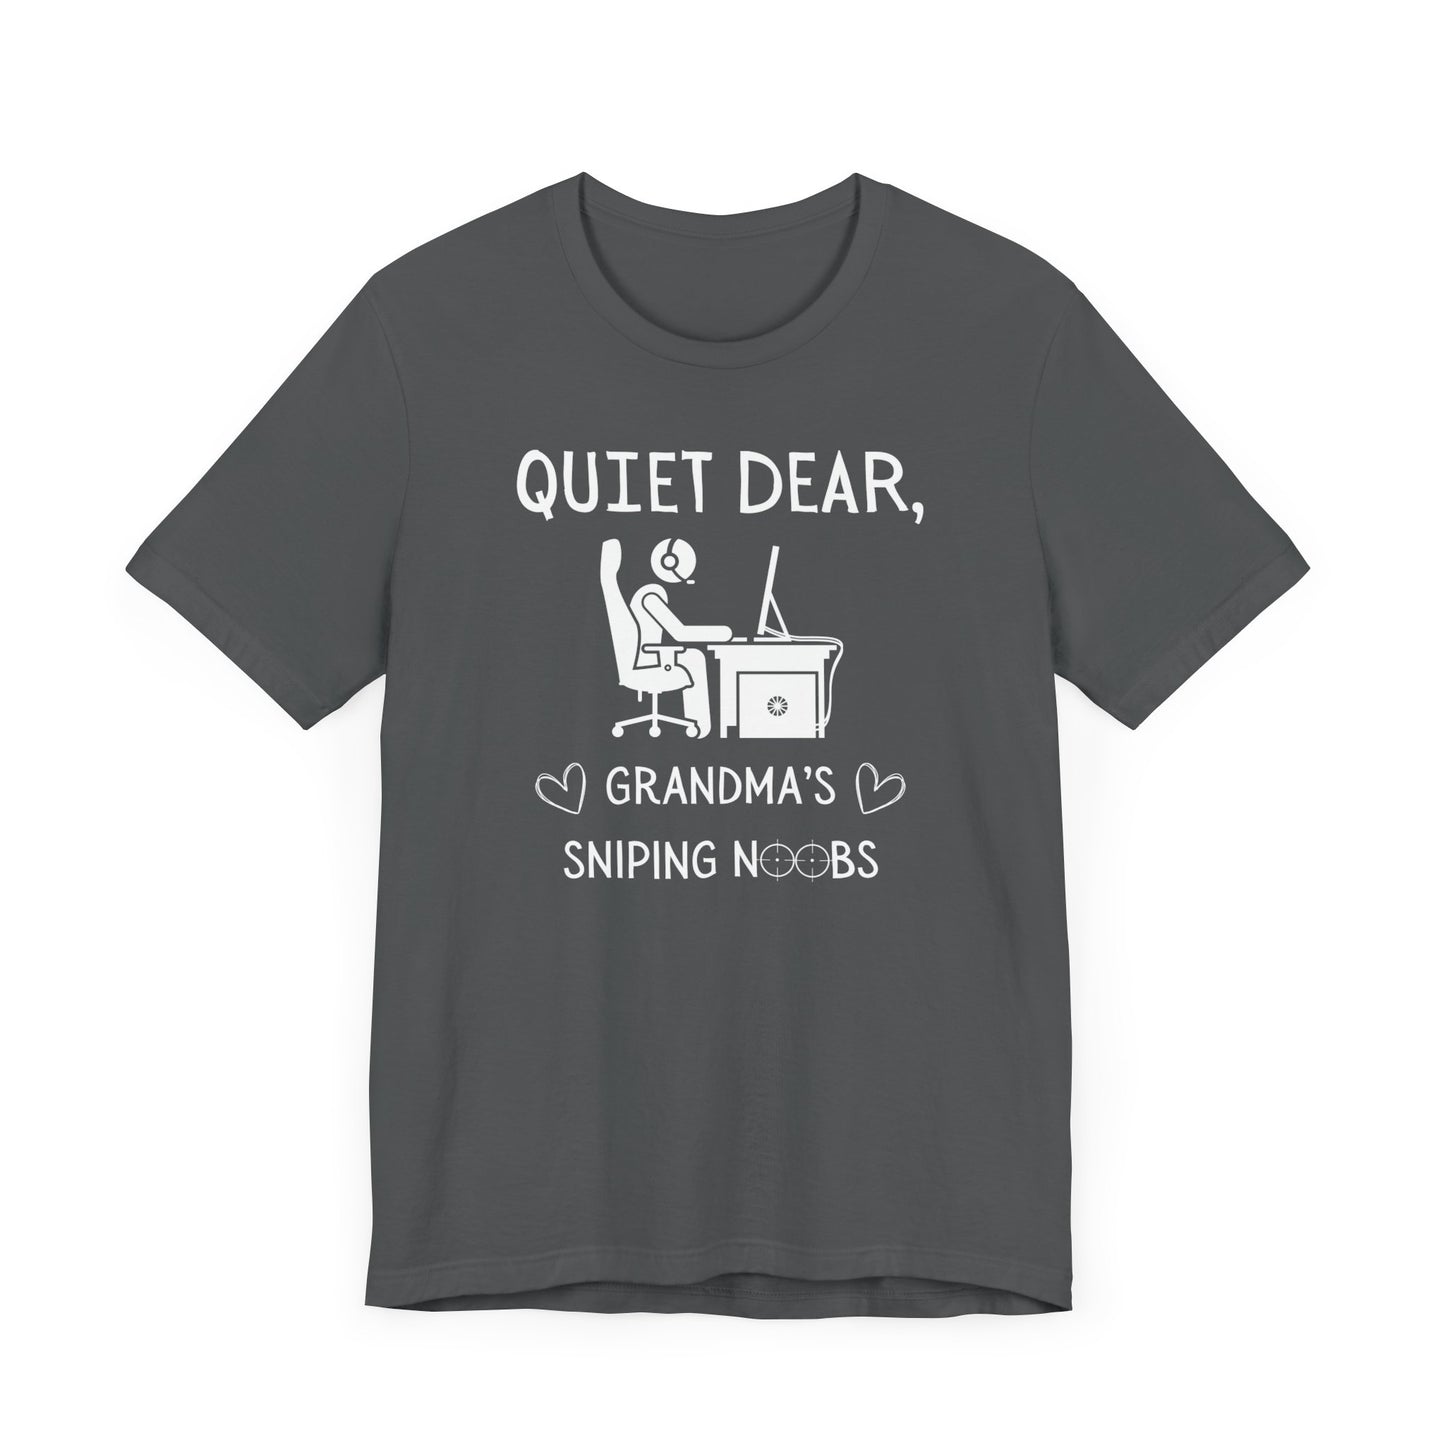 A flat image of a gray  t-shirt that reads Quiet Dear, Grandma's Sniping Noobs in white text. The lower text is framed by two hearts, and the O's are in the shape of sniper scopes. In the center of the shirt is an image of a person at a desk with a gaming PC.